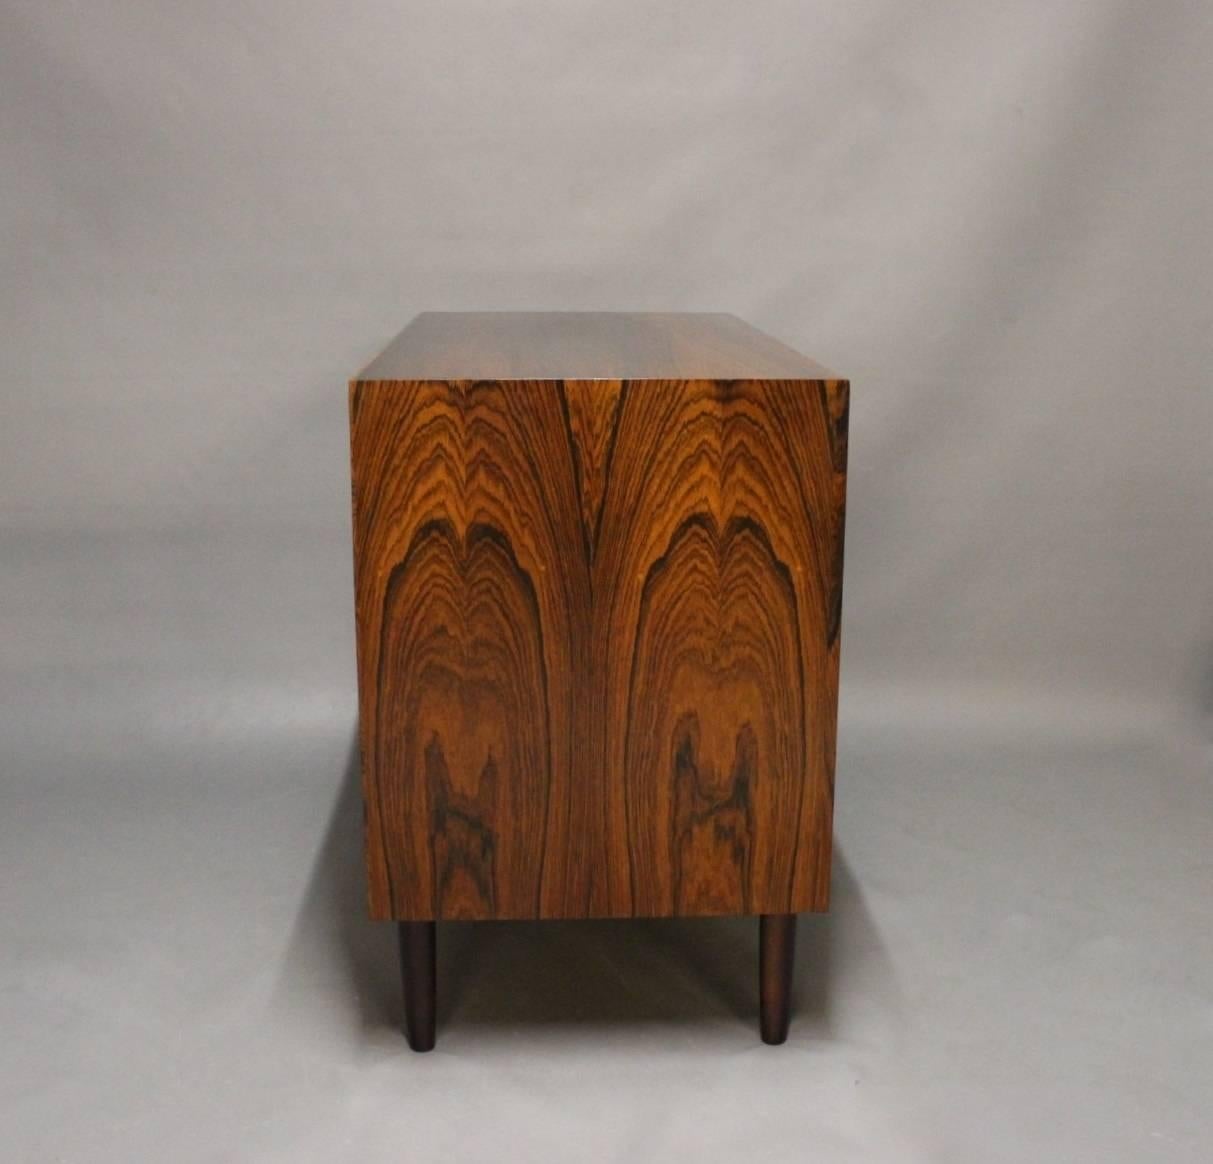 Sideboard in rosewood of Danish design from the 1960s. The sideboard is in great vintage condition.